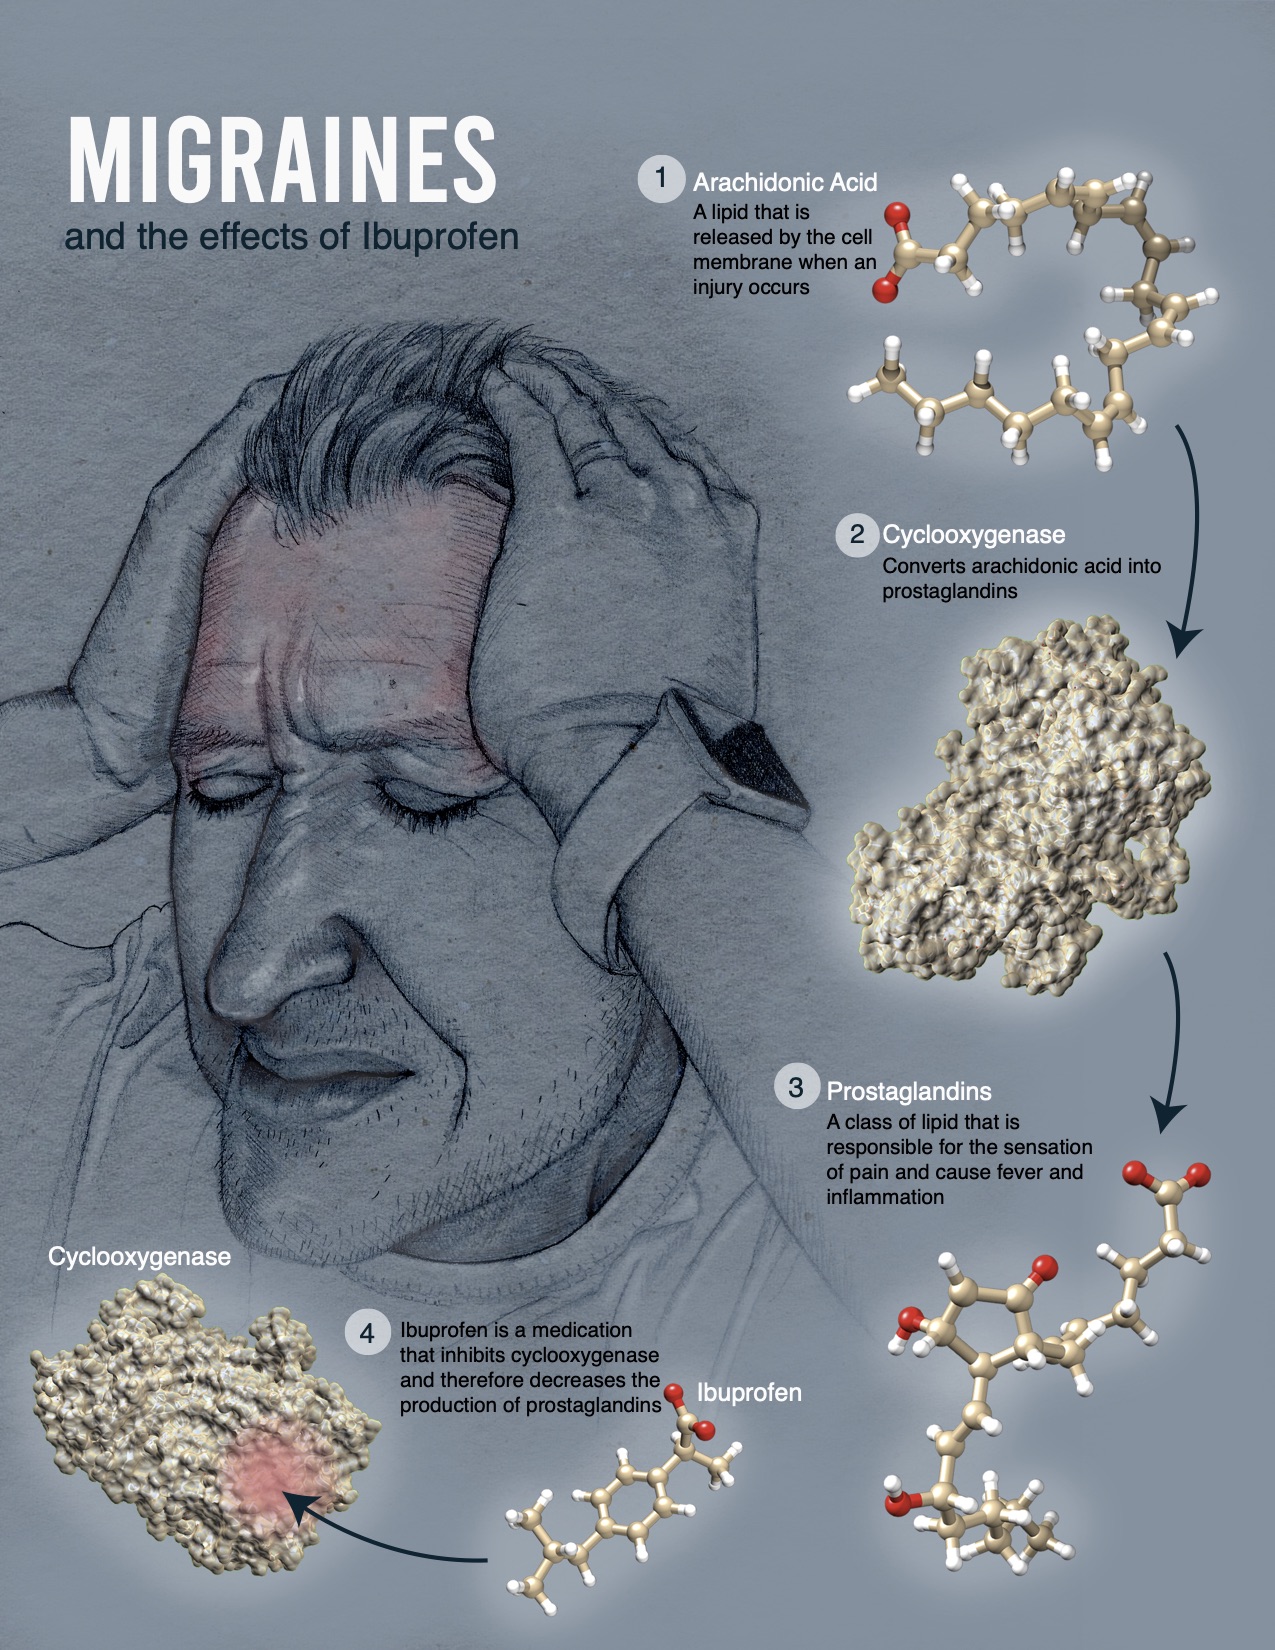 An illustration showing the symptoms and science behind migraines.